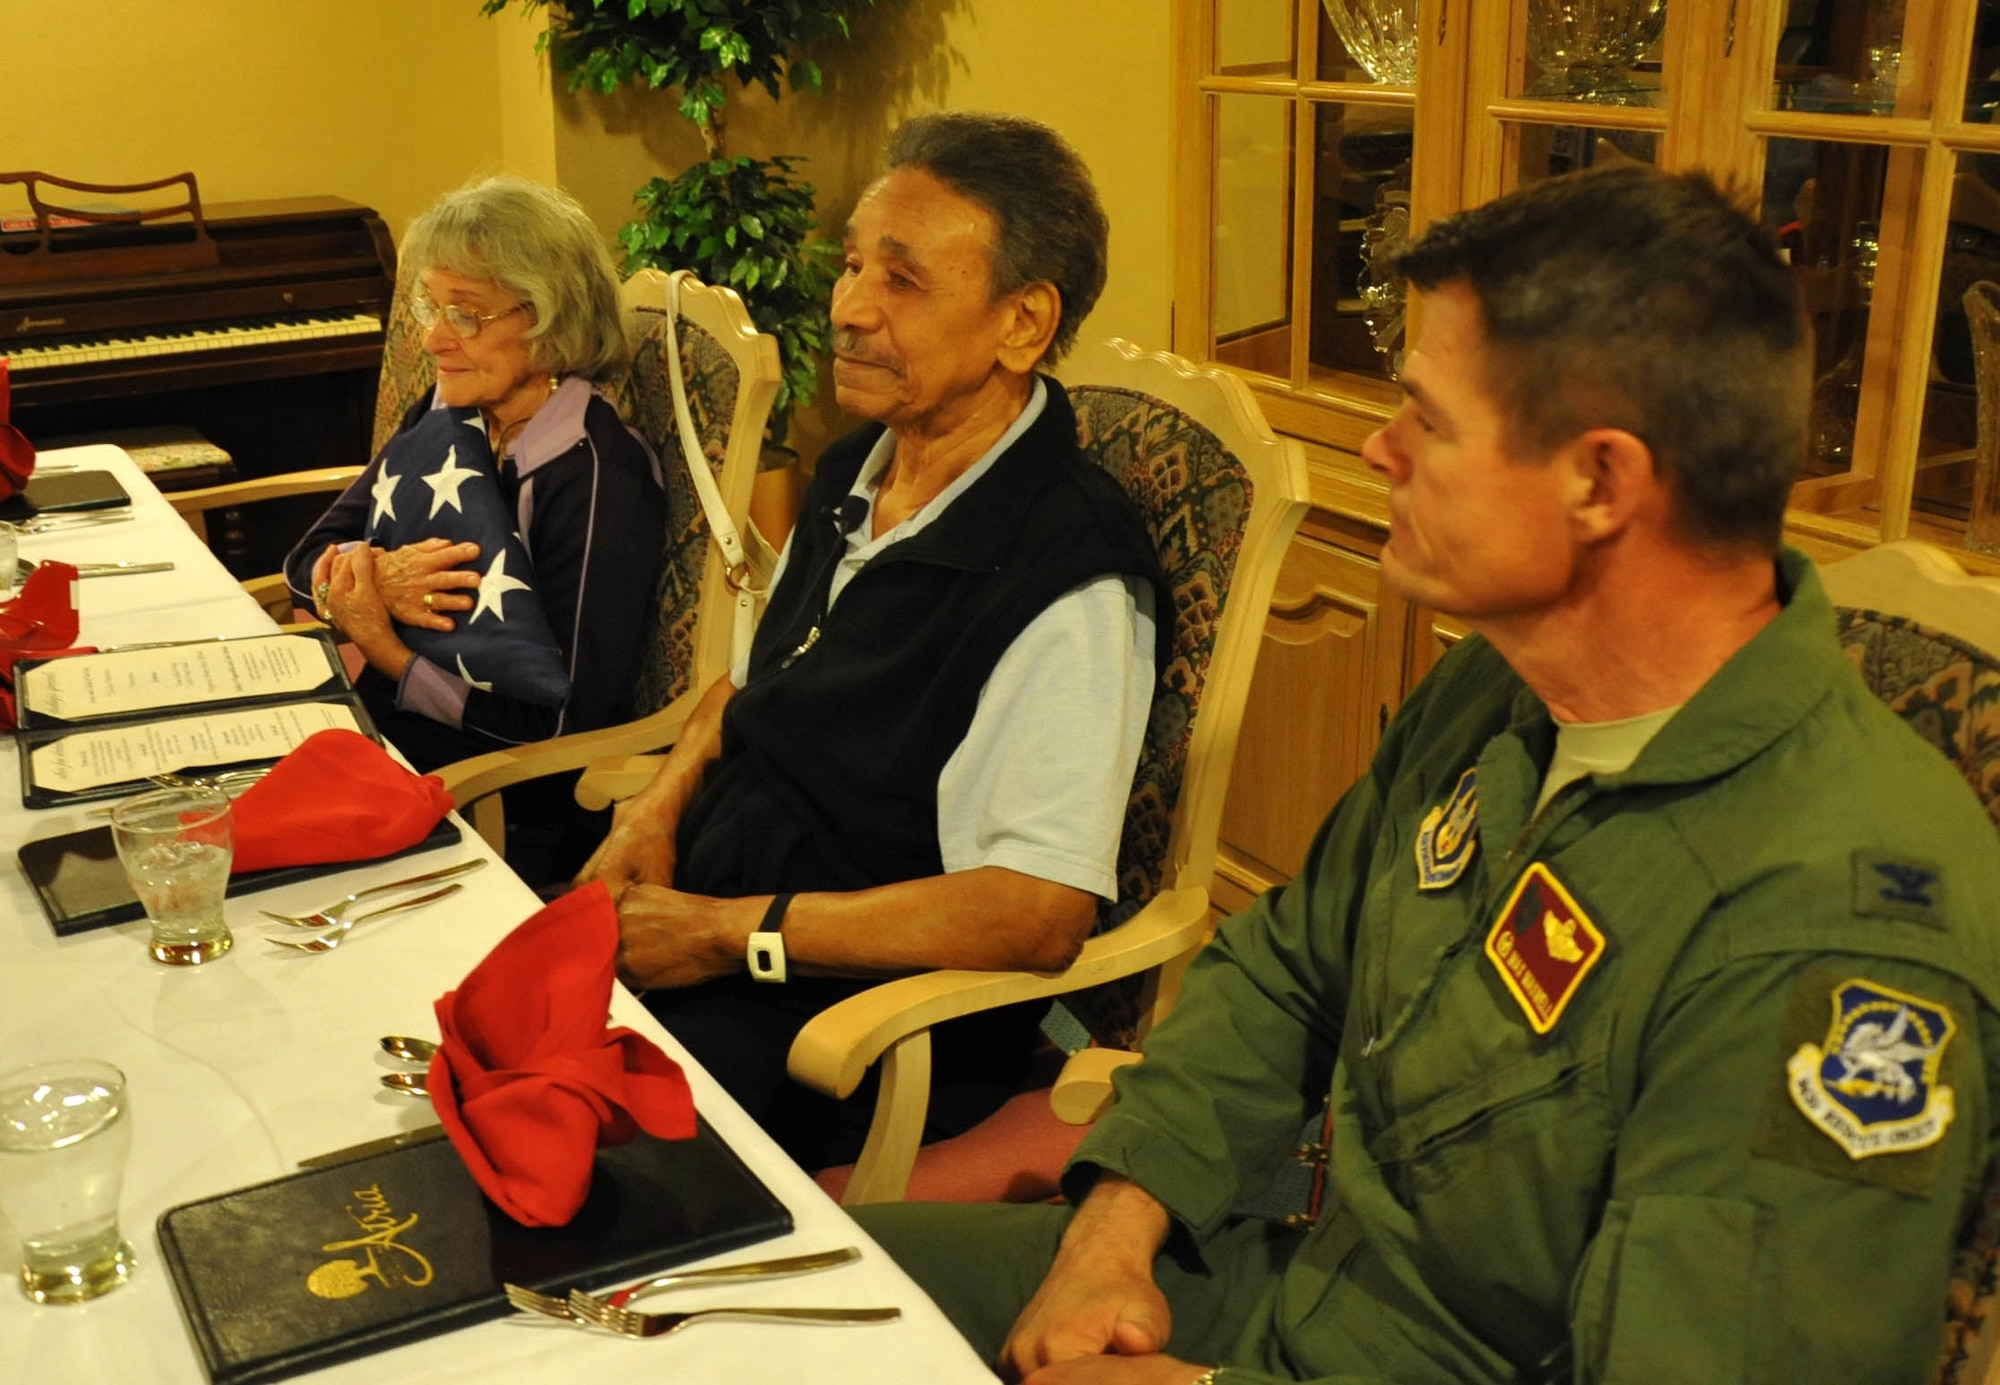 Col. Harold Maxwell, 943rd Rescue Group commander, Mr. Ralph Stewart and his wife Rosalyn sit together after Mr. Stewart was presented with an American Flag for his service during World War II. Mr. Stewart was a mechanic on the B-25 and B-26 bombers as a Tuskegee Airman. (U.S. Air Force Photo/ Master Sgt. Luke Johnson)